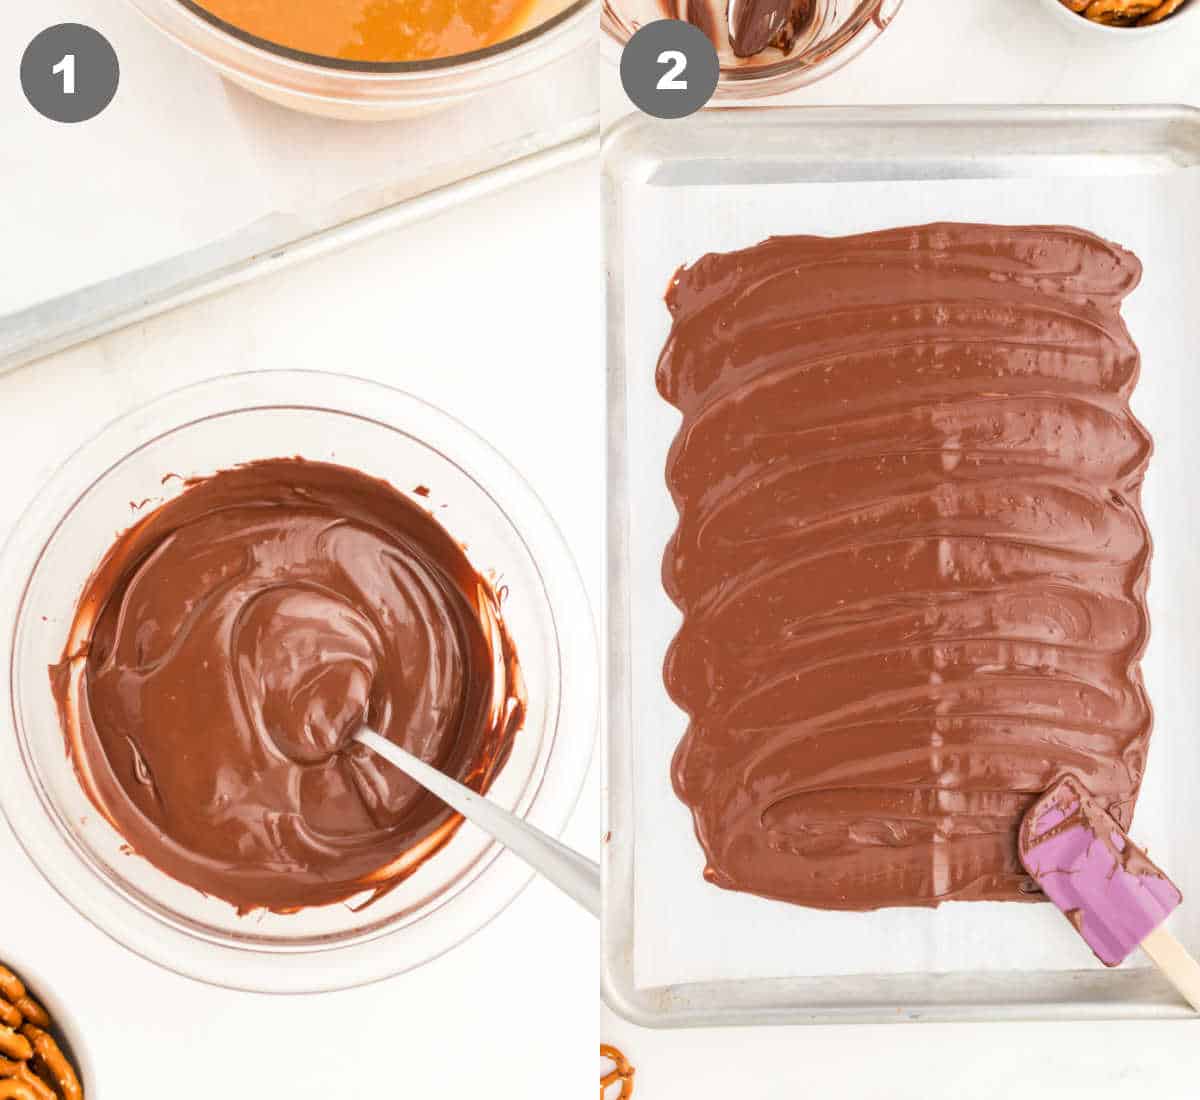 Melted chocolate in a bowl then spread onto parchment paper.